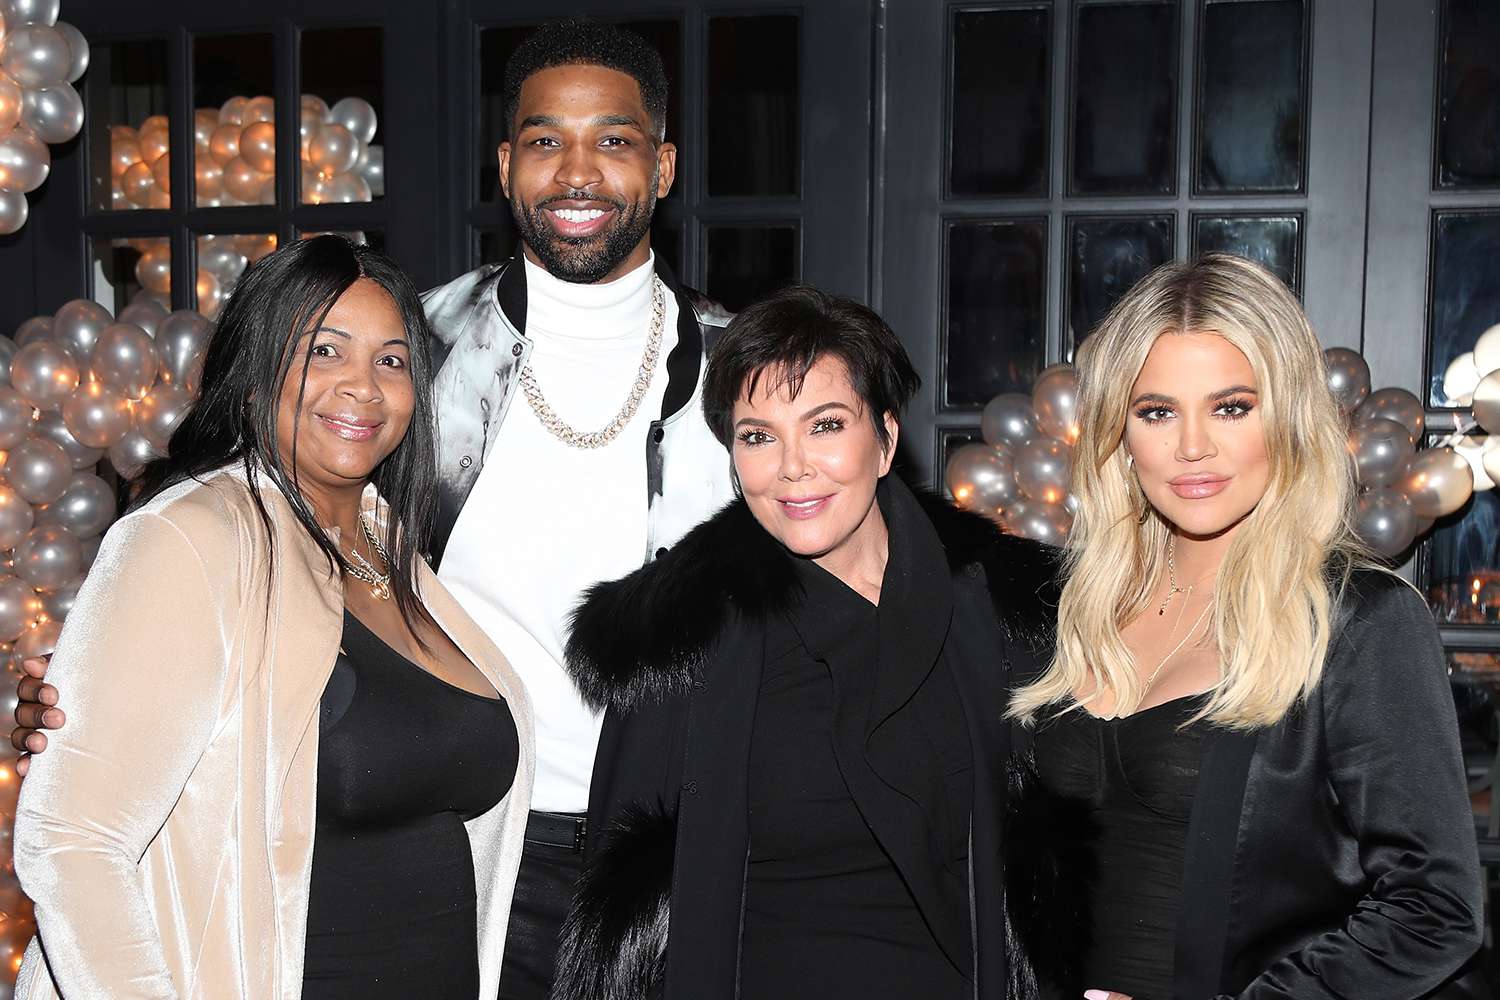 Tristan Thompson and Brother Amari Find Support from Khloé Kardashian